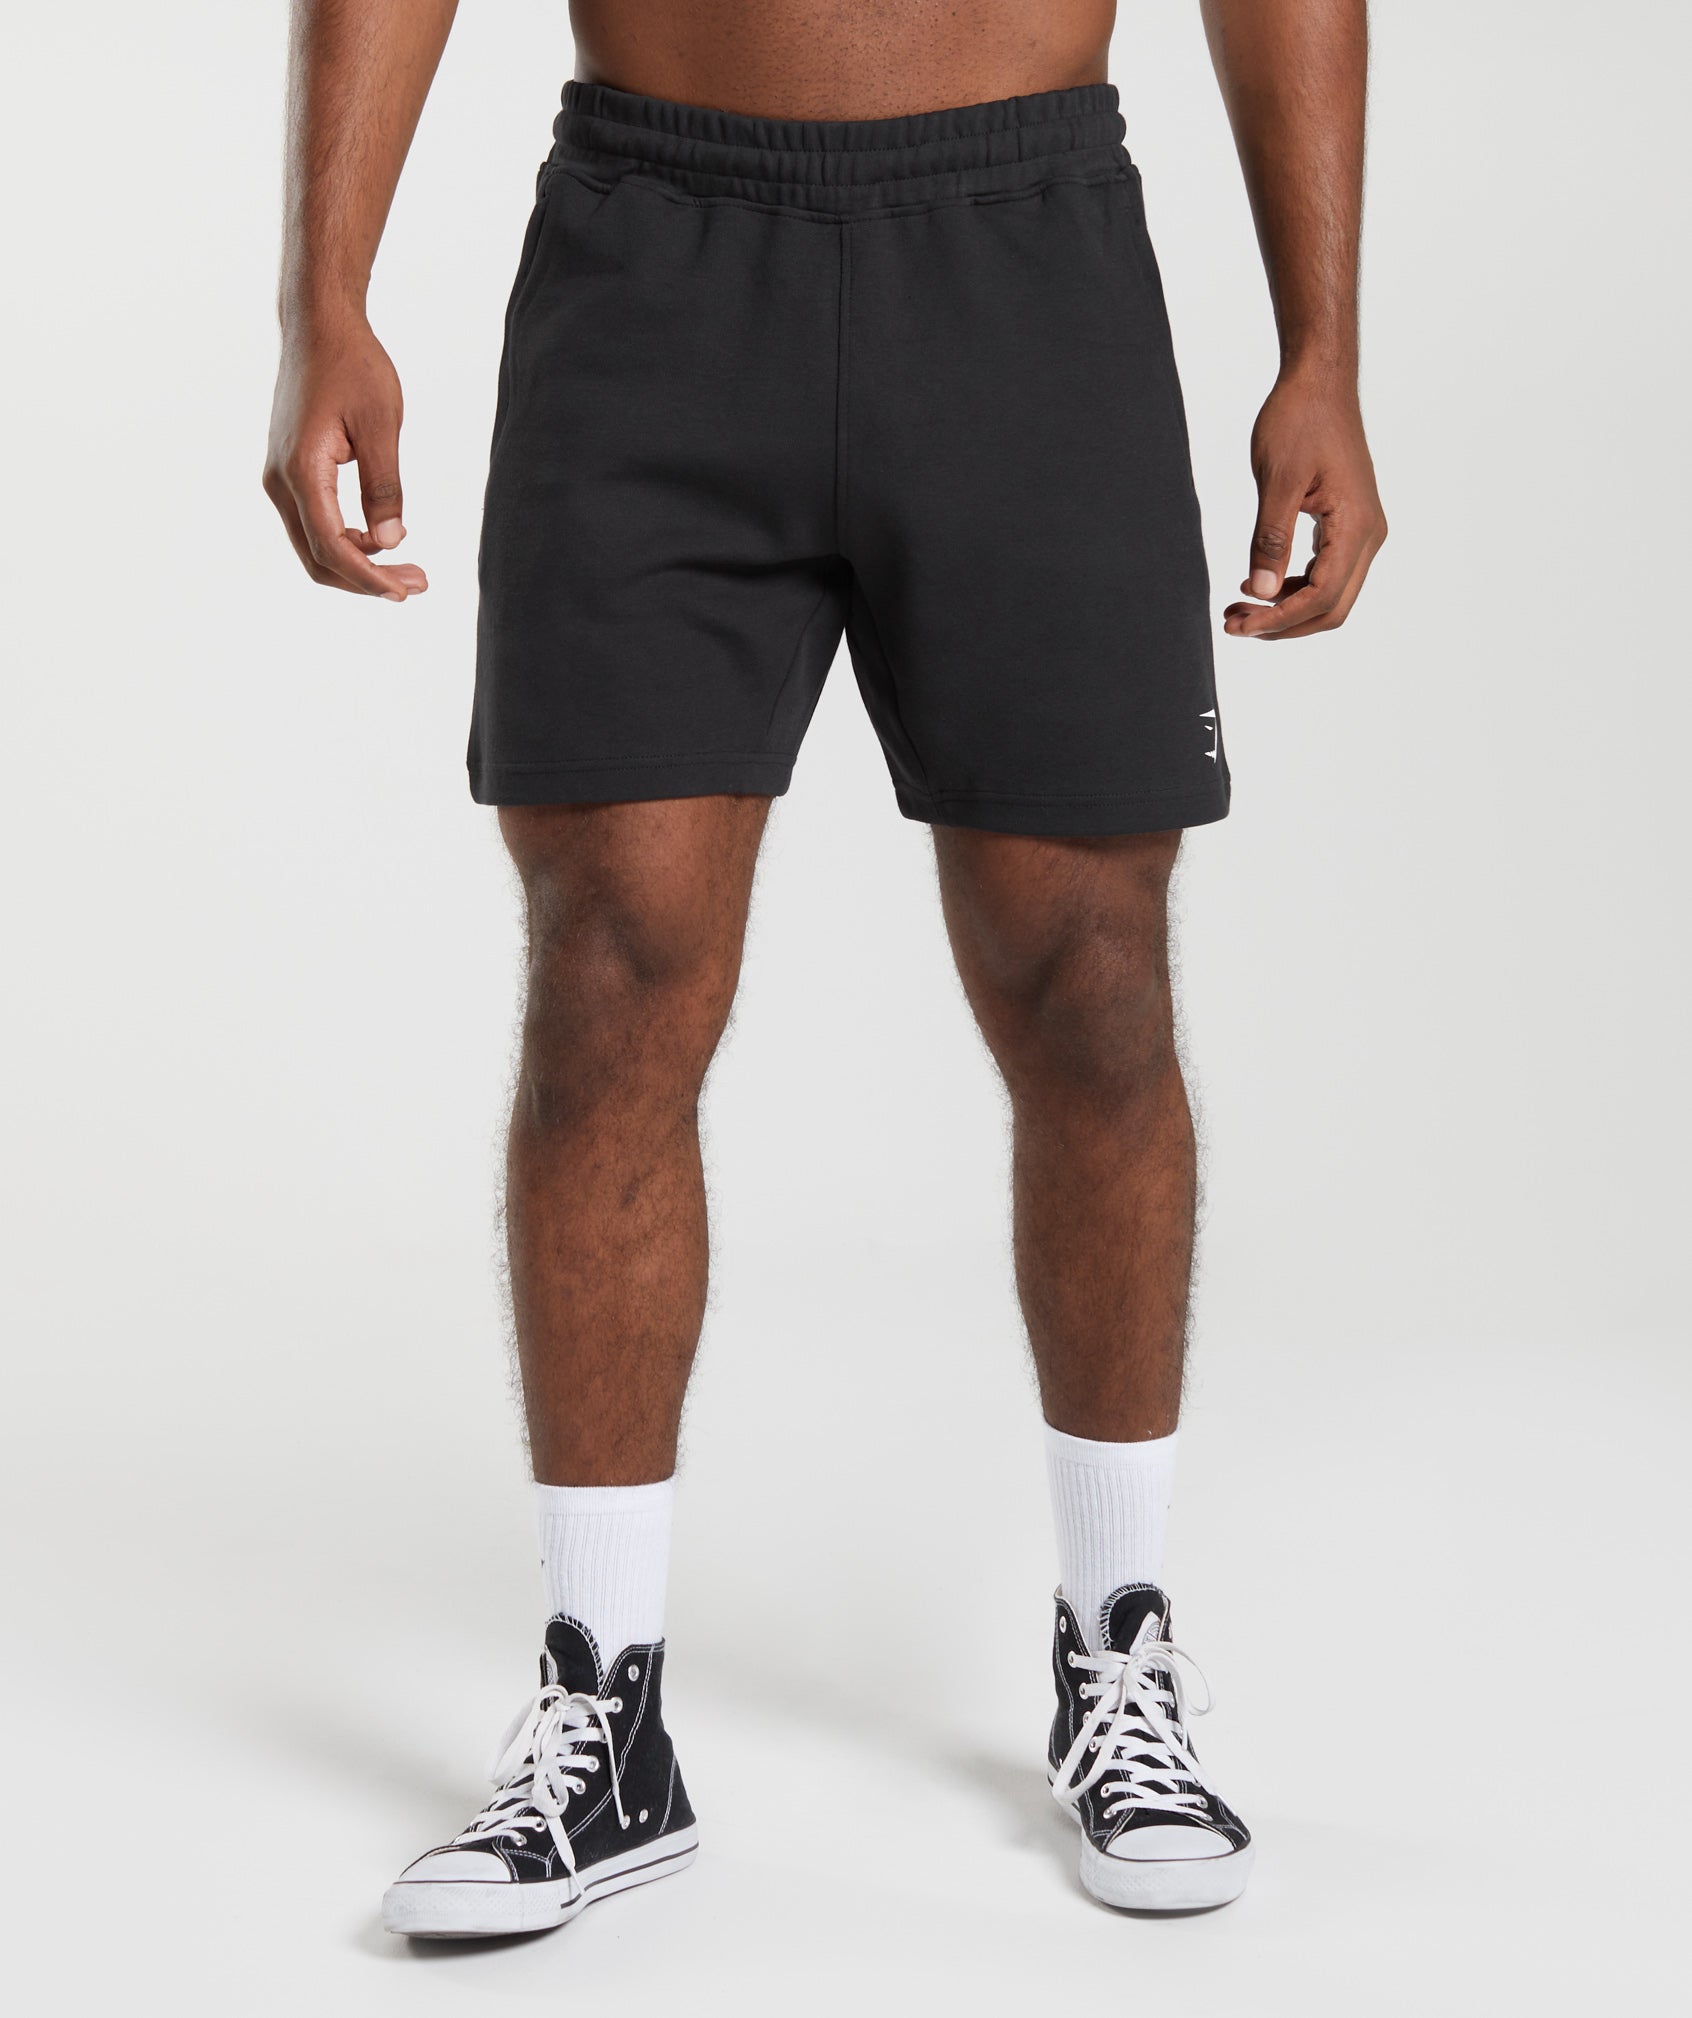 React 7" Shorts in Black - view 1